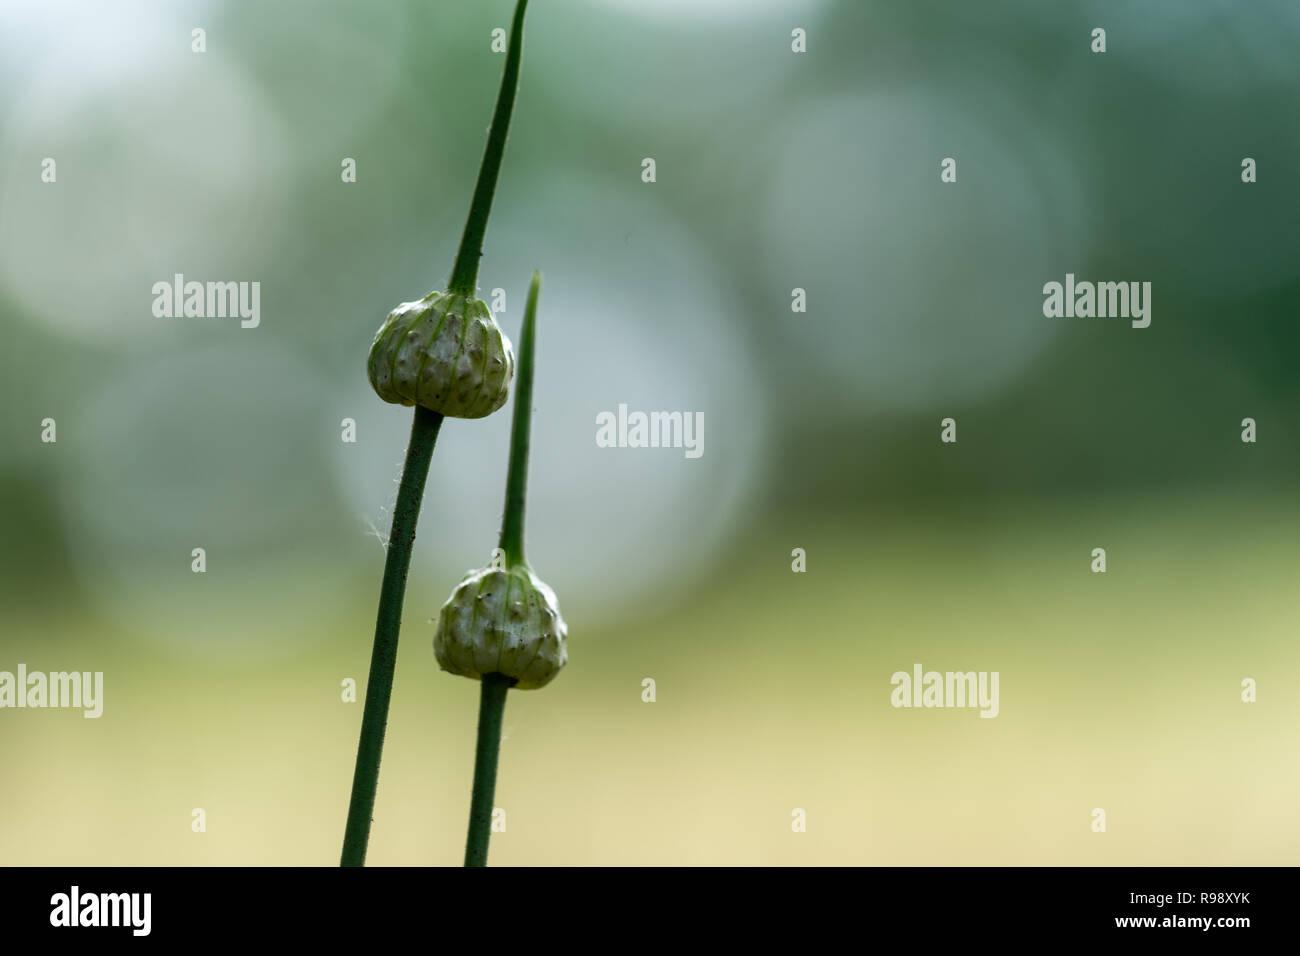 Common rush (Juncus effusus), buds and flowers, Close up with shallow depth of field and bokeh Stock Photo